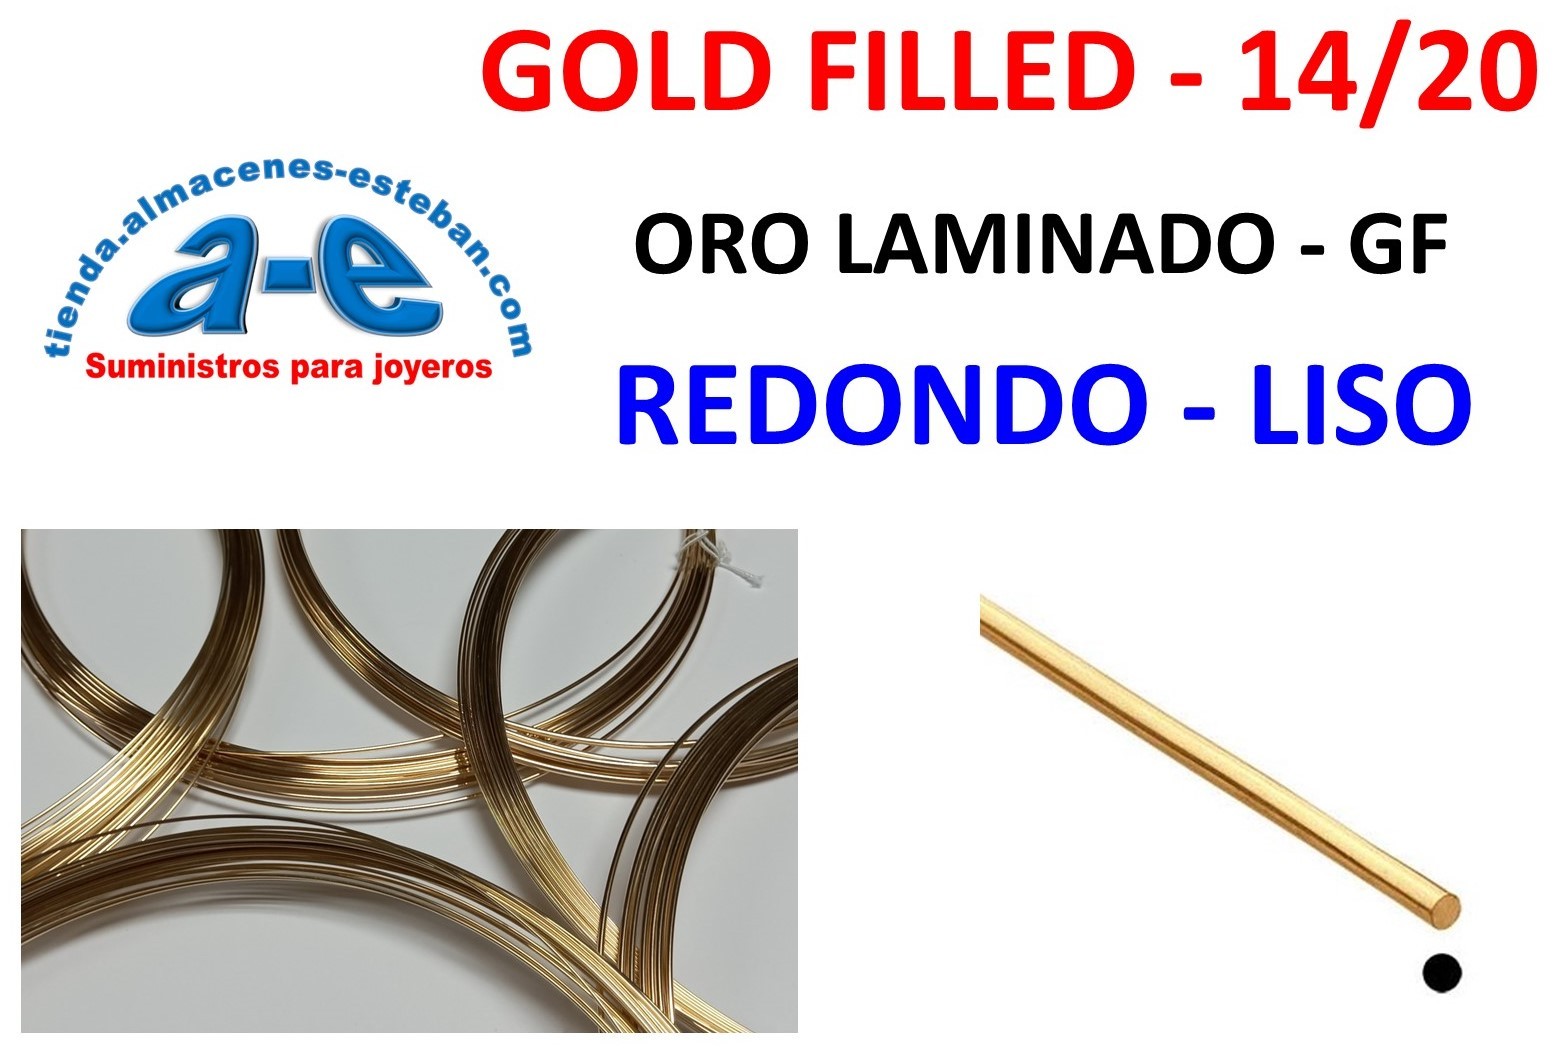 GOLD-FILLED-HILO-REDONDO-